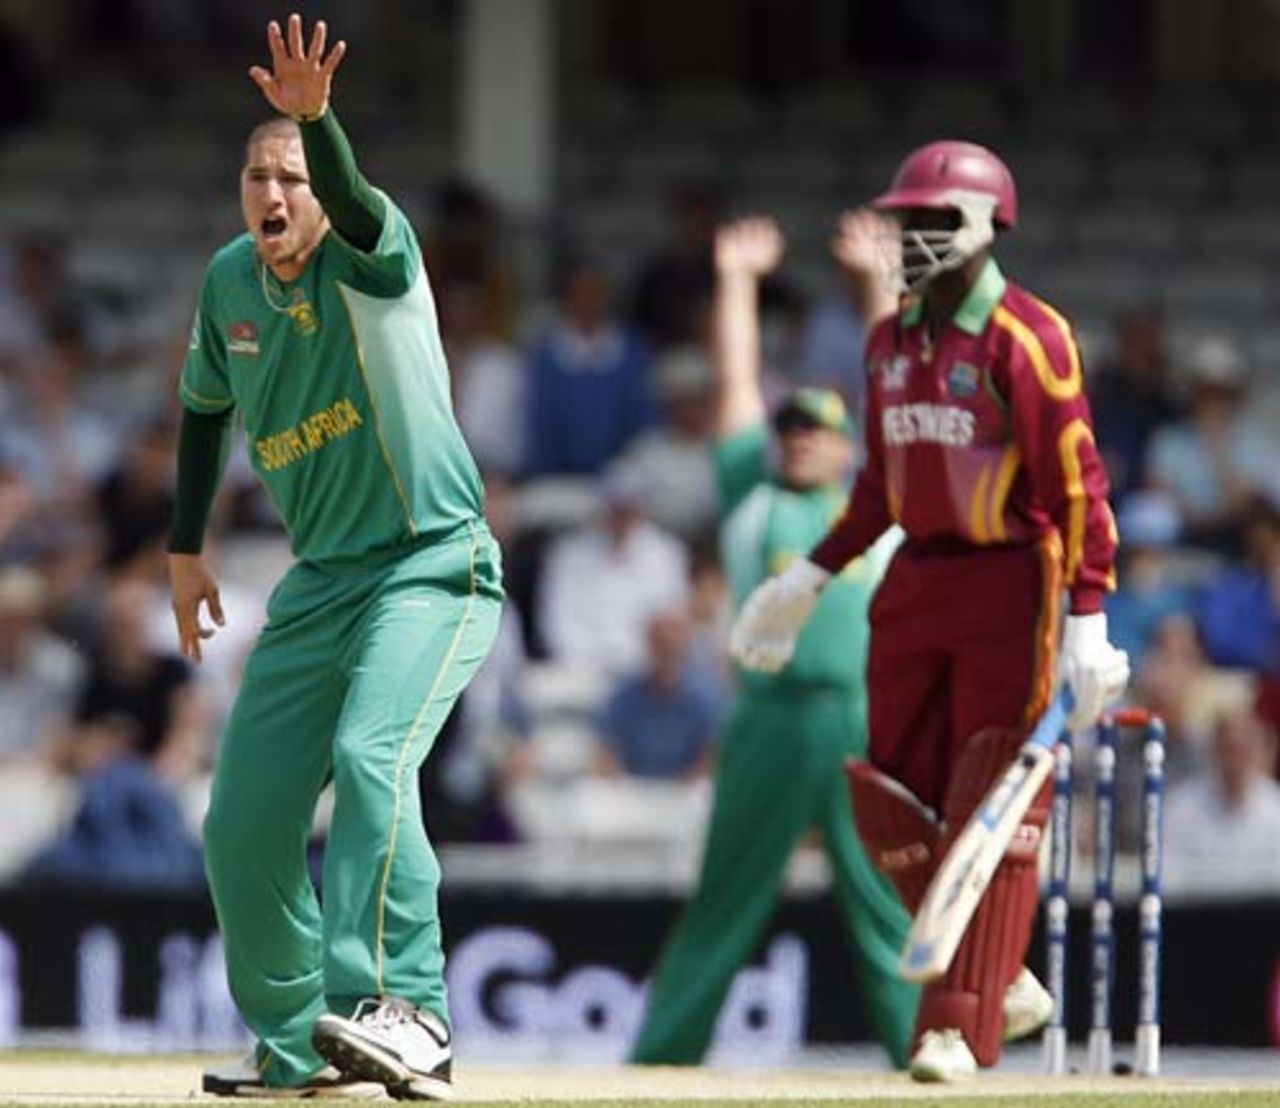 Wayne Parnell sent back the West Indian openers early, South Africa v West Indies, ICC World Twenty20 Super Eights, The Oval, June 13, 2009 